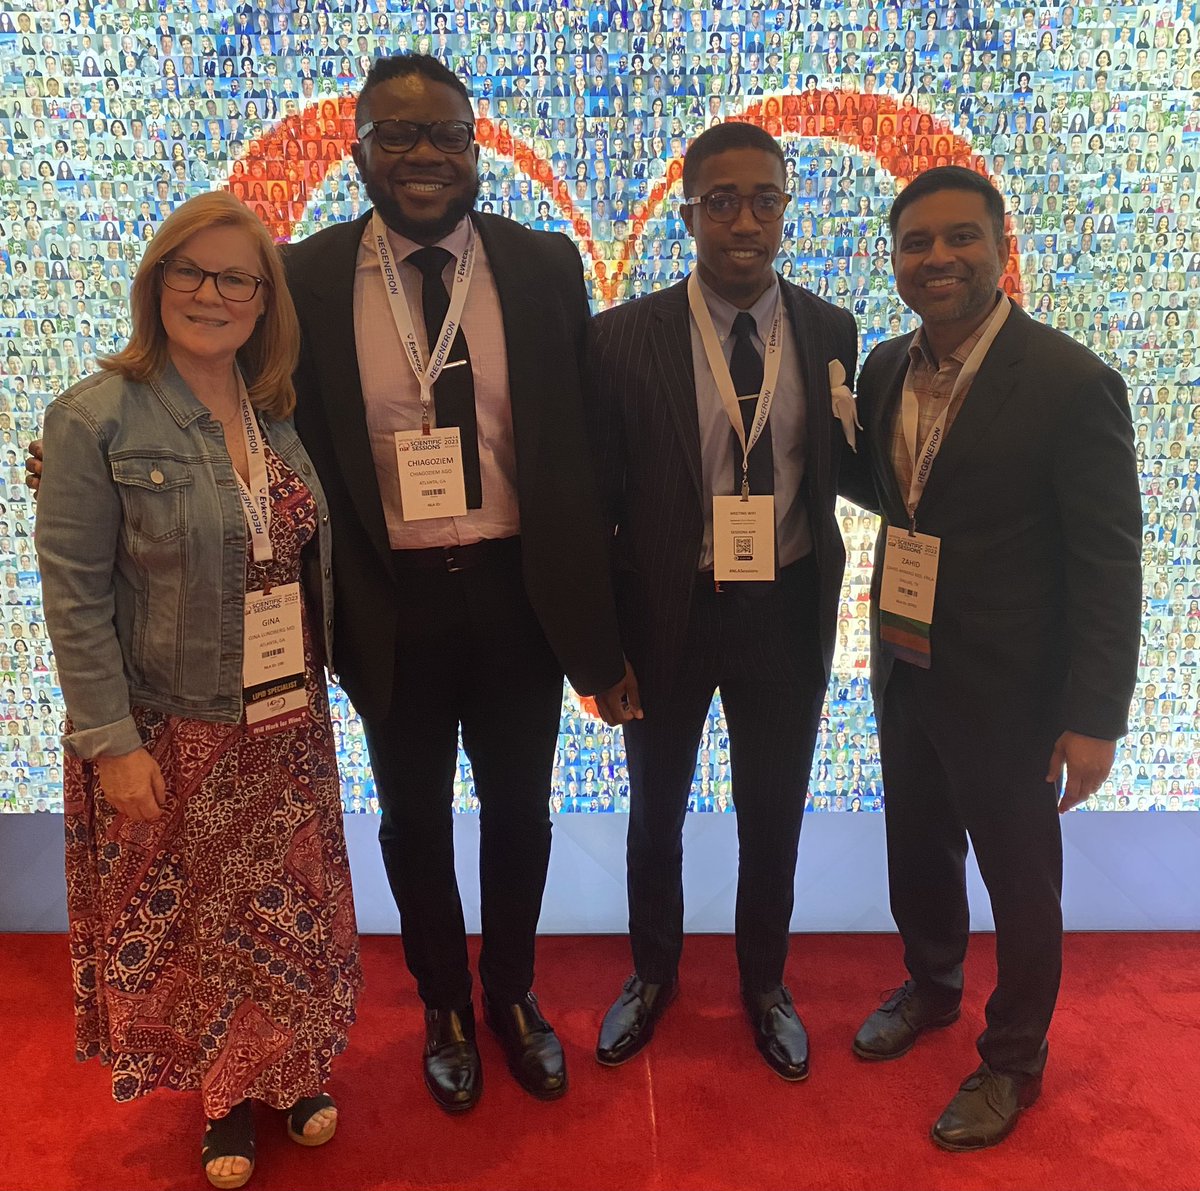 So excited to welcome Med Students from @MSMEDU who want a career in lipids, prevention & Cardiology! Building the @nationallipid pipeline to serve all our patients. #NLASessions @JSaseenPharmD @dan_soffer @Dr_Zahid_Ahmad @MarlysLPA @LipidDNP24 @DineshKalra @nationallipid